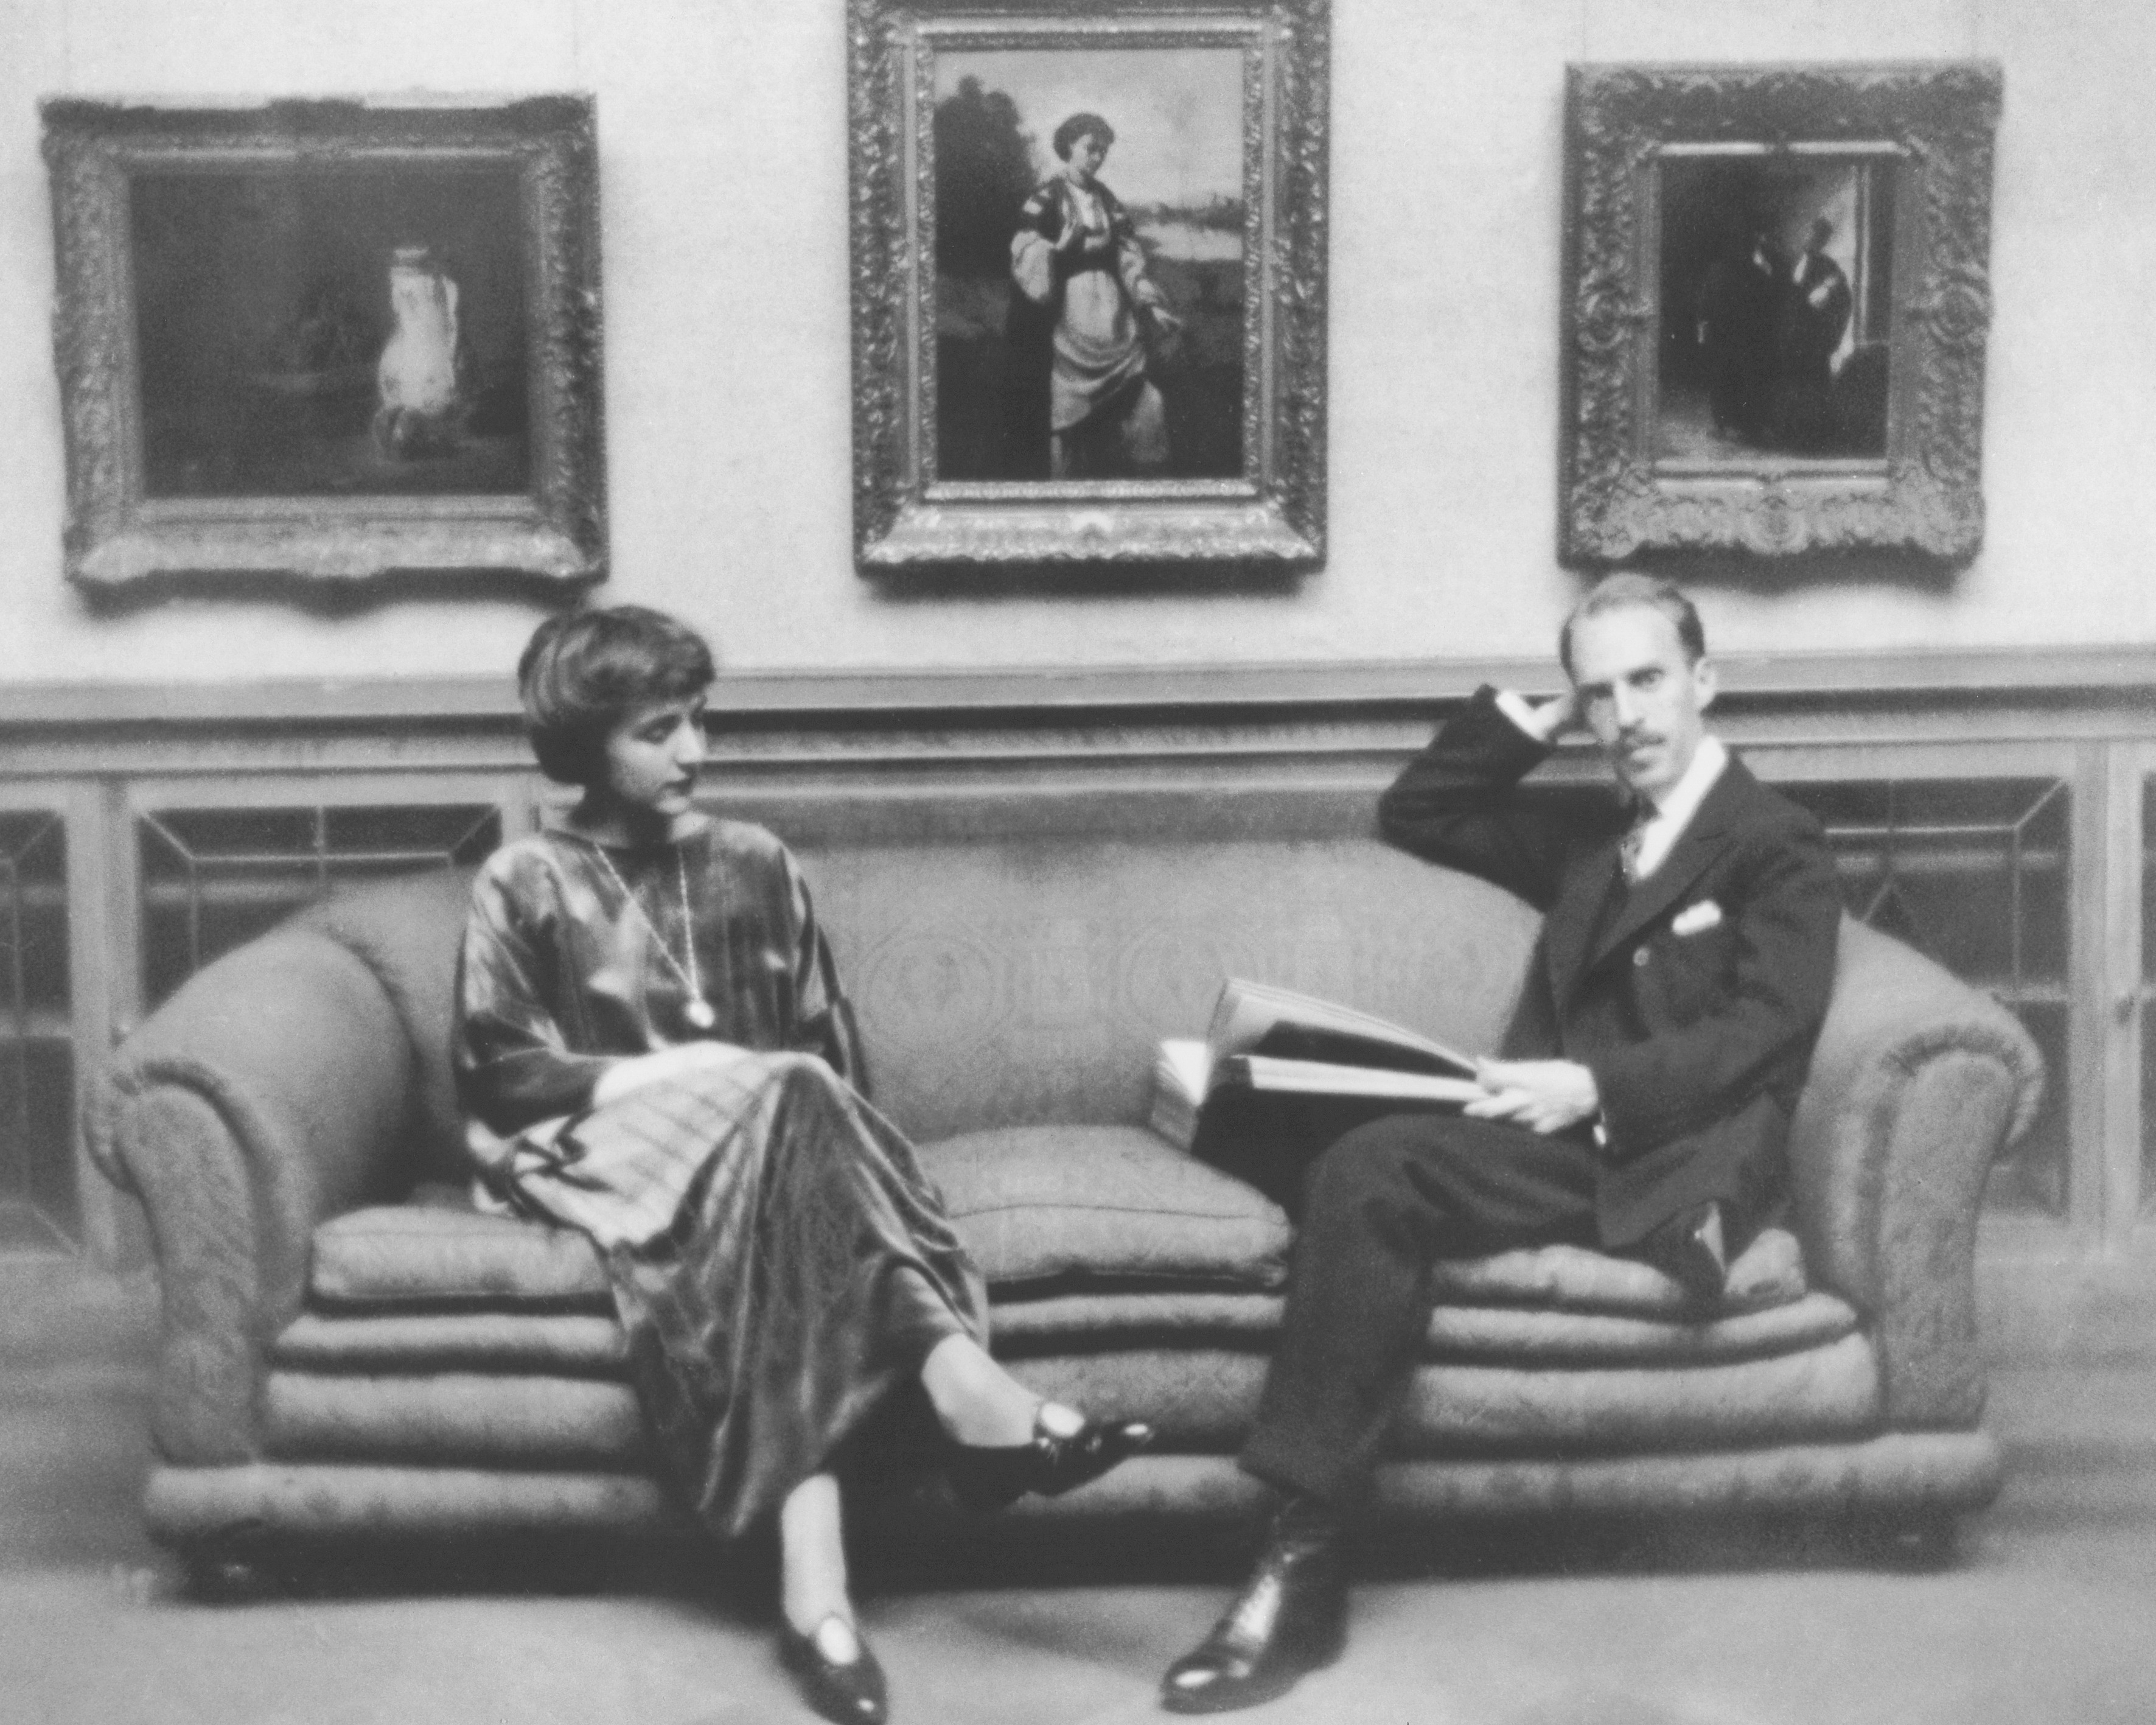 After the deaths of his father and brother in 1917 and 1918, Duncan Phillips found solace in art. His wife, Marjorie Phillips, was a painter. They opened The Phillips Collection in Washington, D.C., in 1921. They are pictured in the Main Gallery, circa 1920. CREDIT: The Phillips Collection